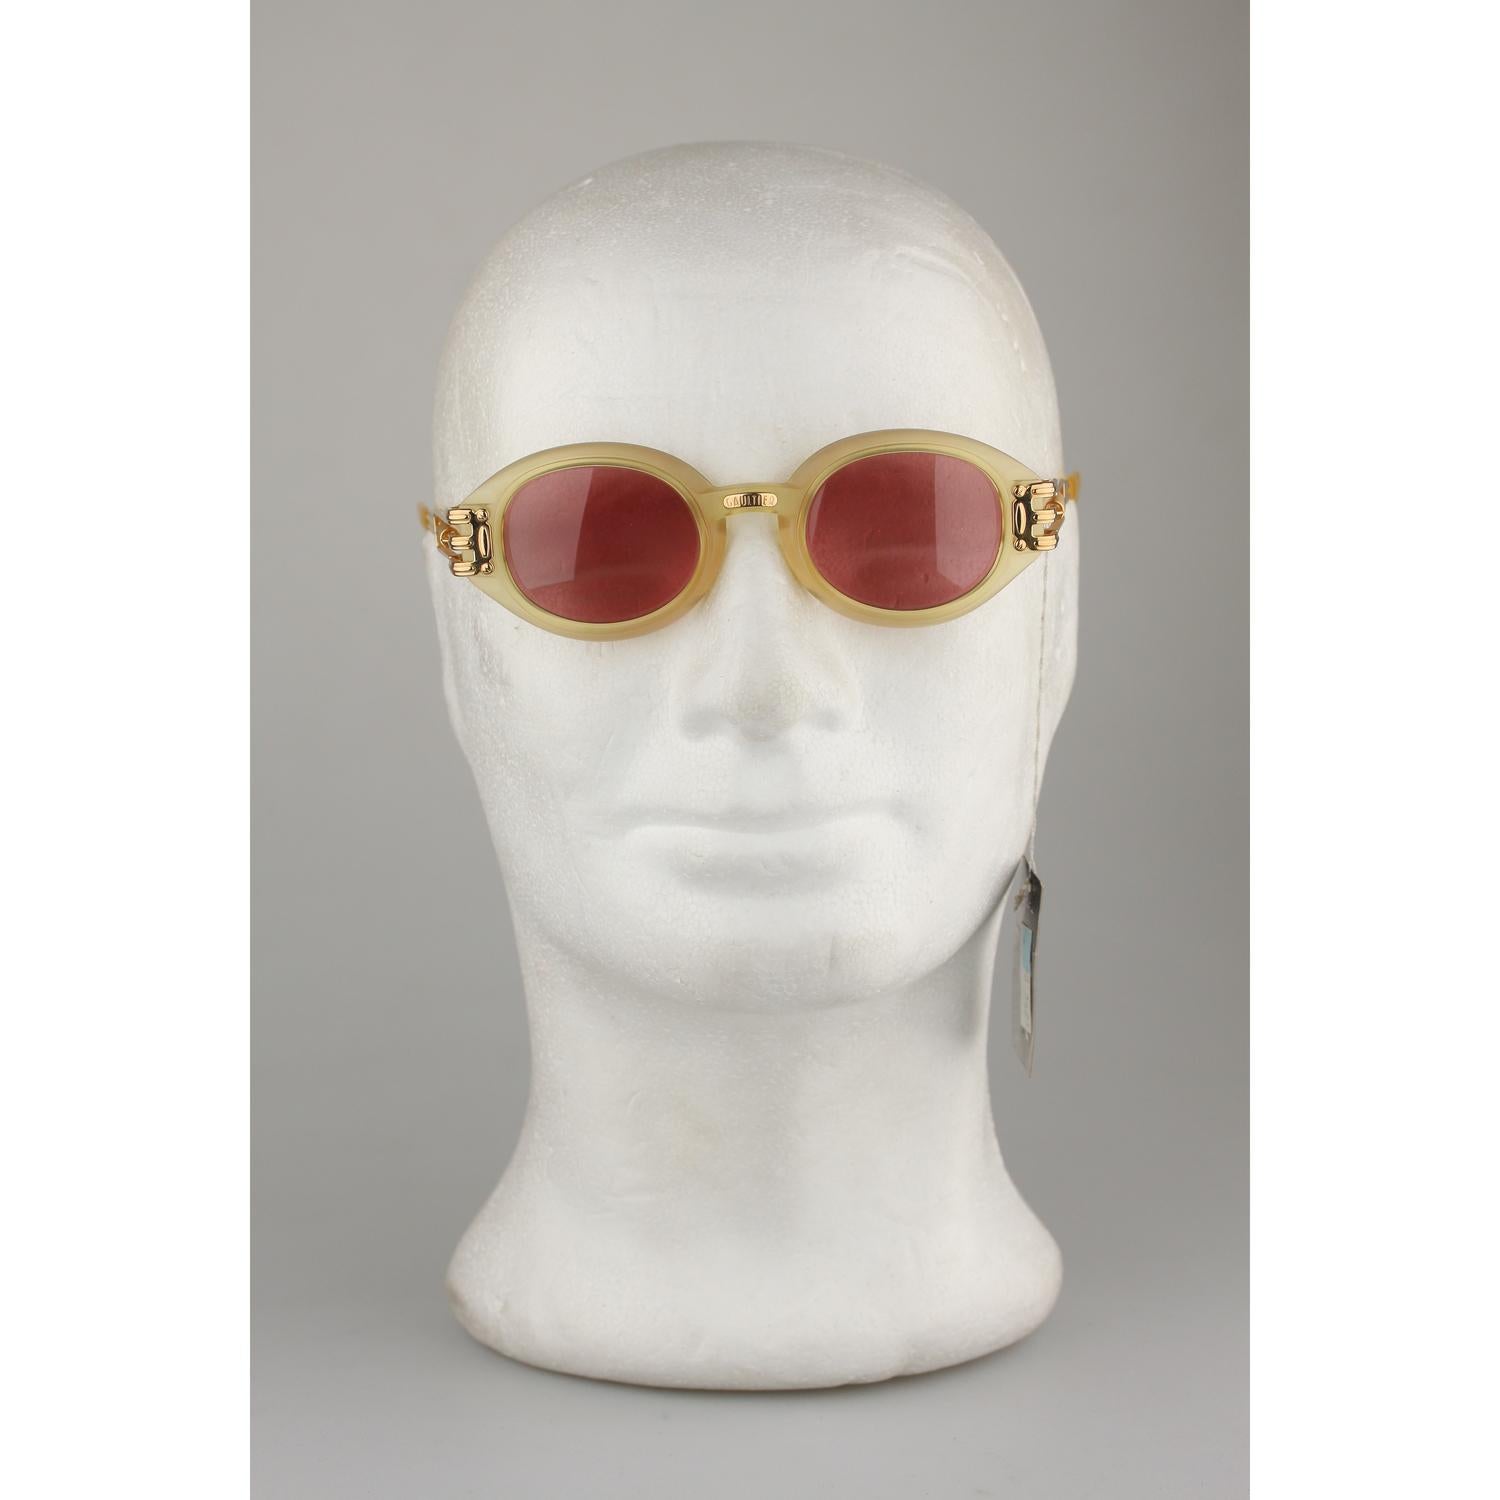 Jean Paul Gaultier Vintage Gold Oval Sunglasses 56-5203 New Old Stock 5